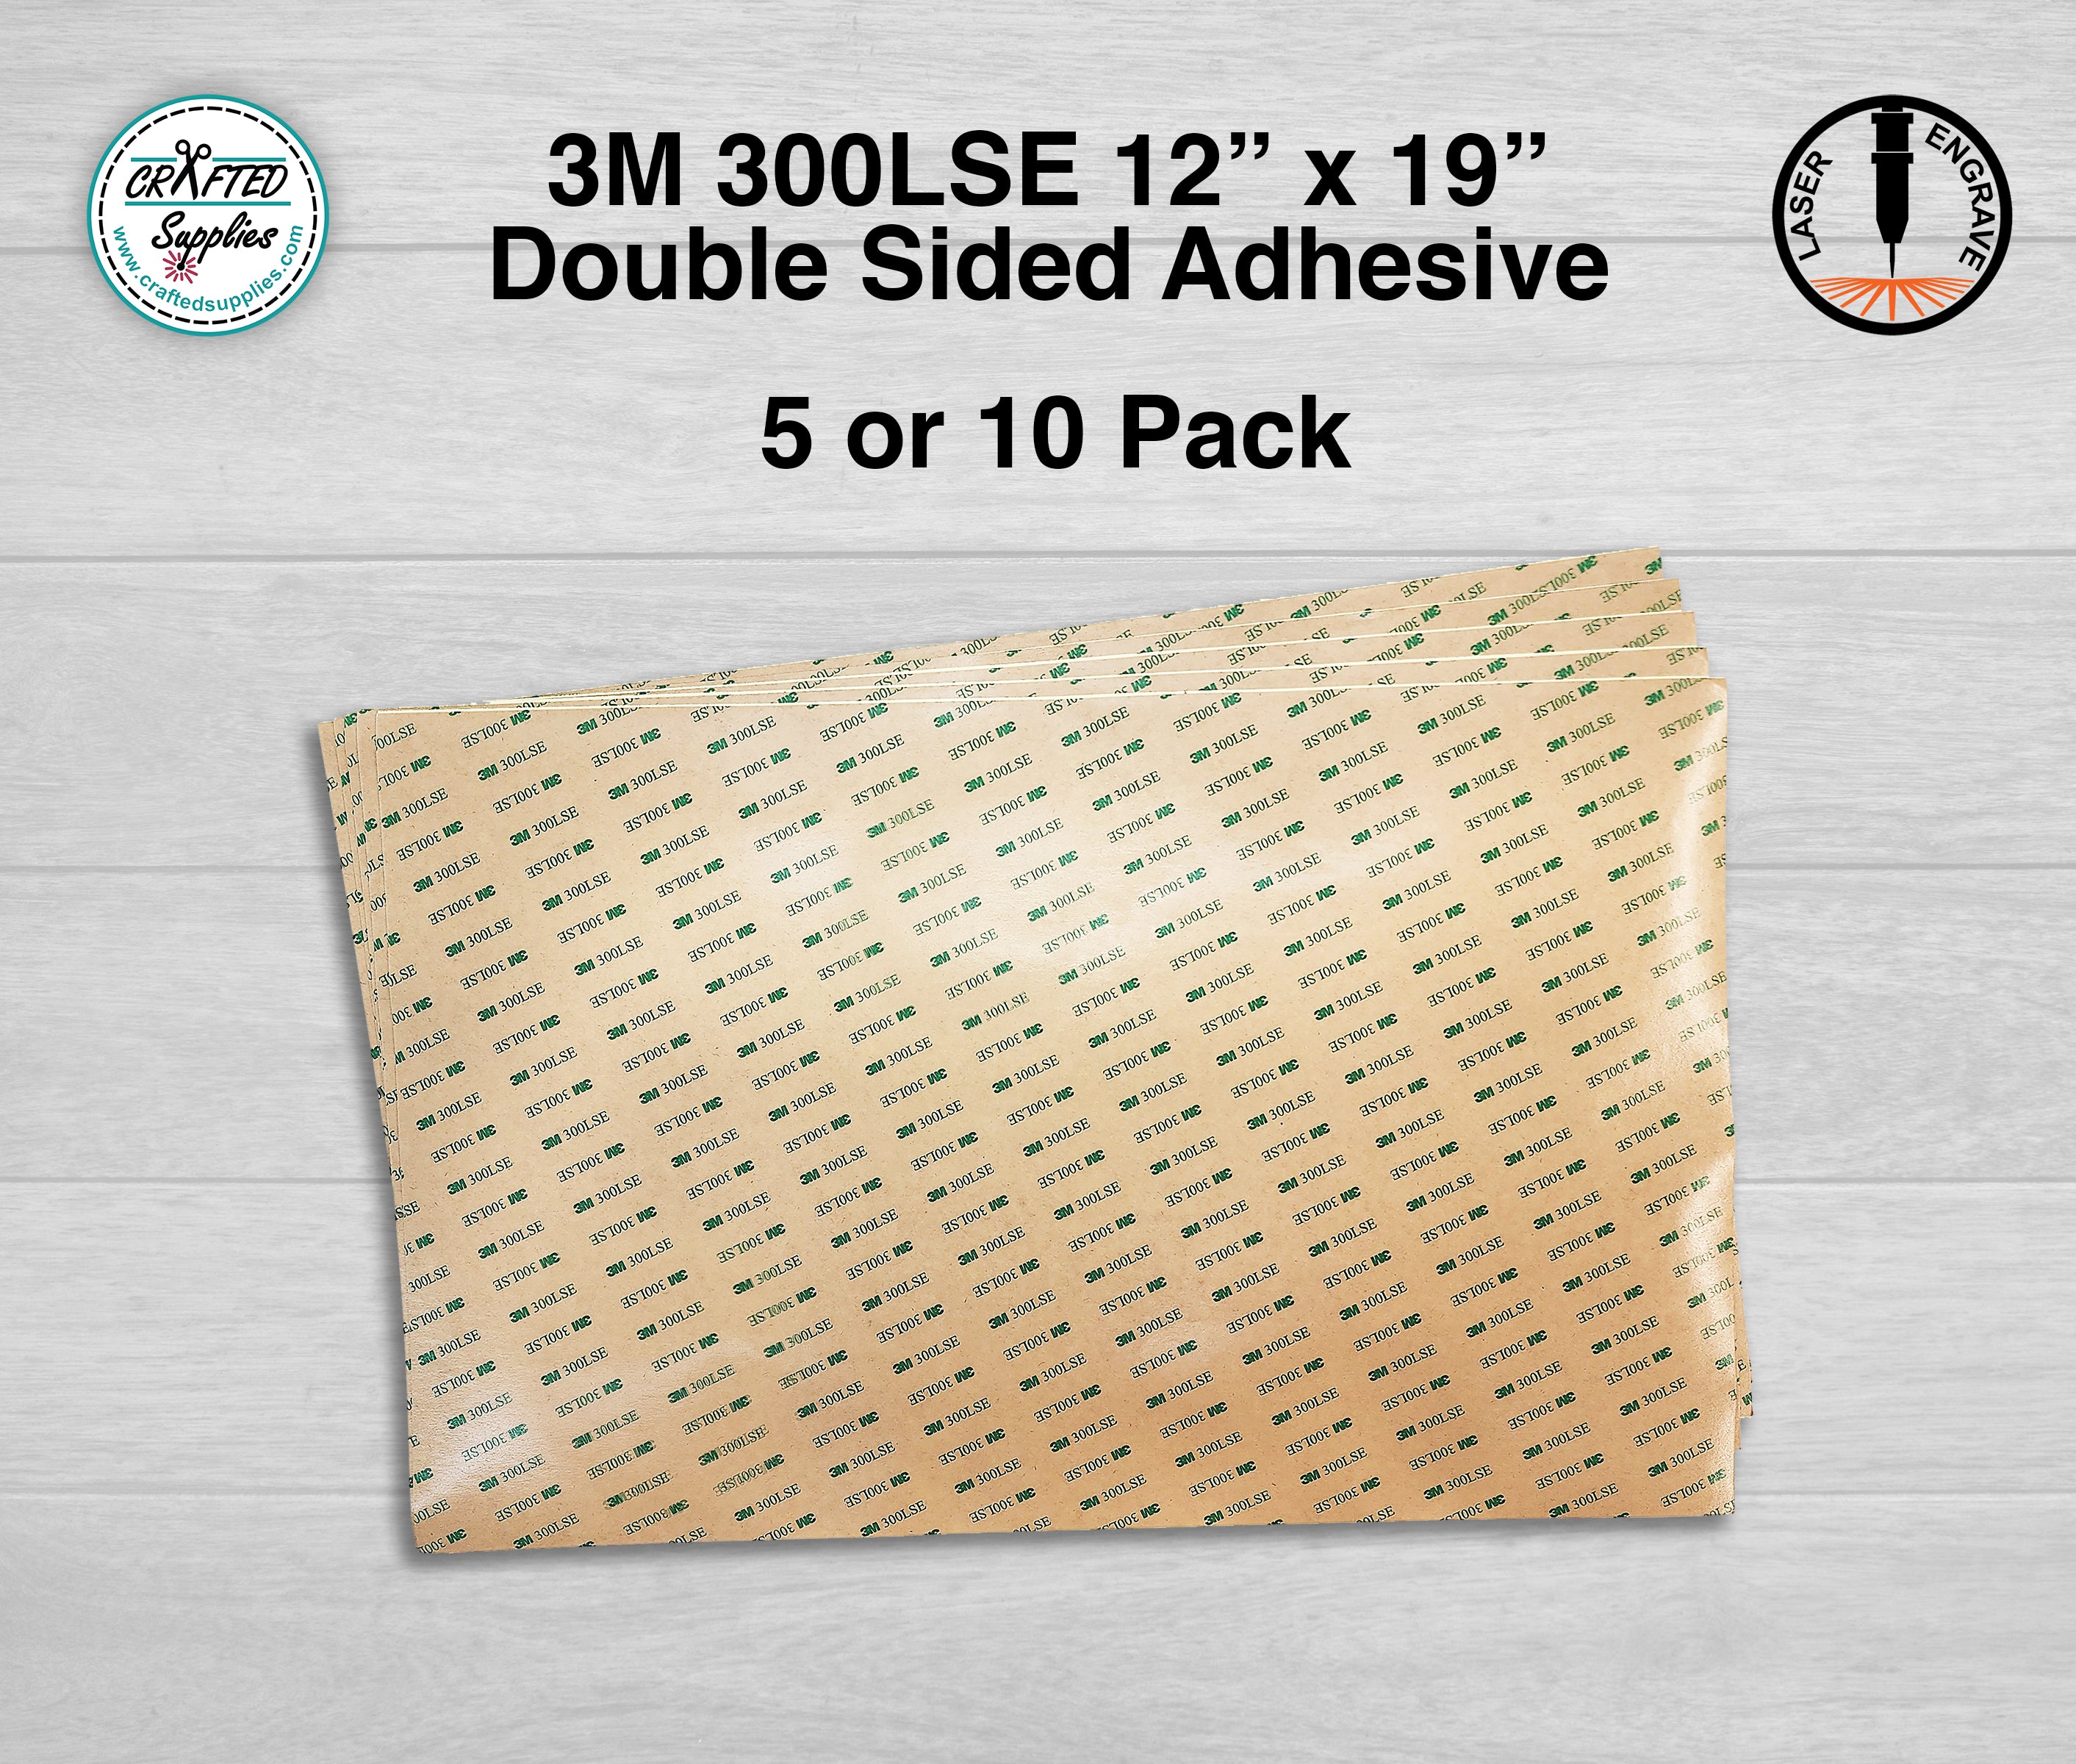 5pc 3M 300LSE 4x8”SUPER STRONG DOUBLE SIDED TAPE SHEET PAD - Auto